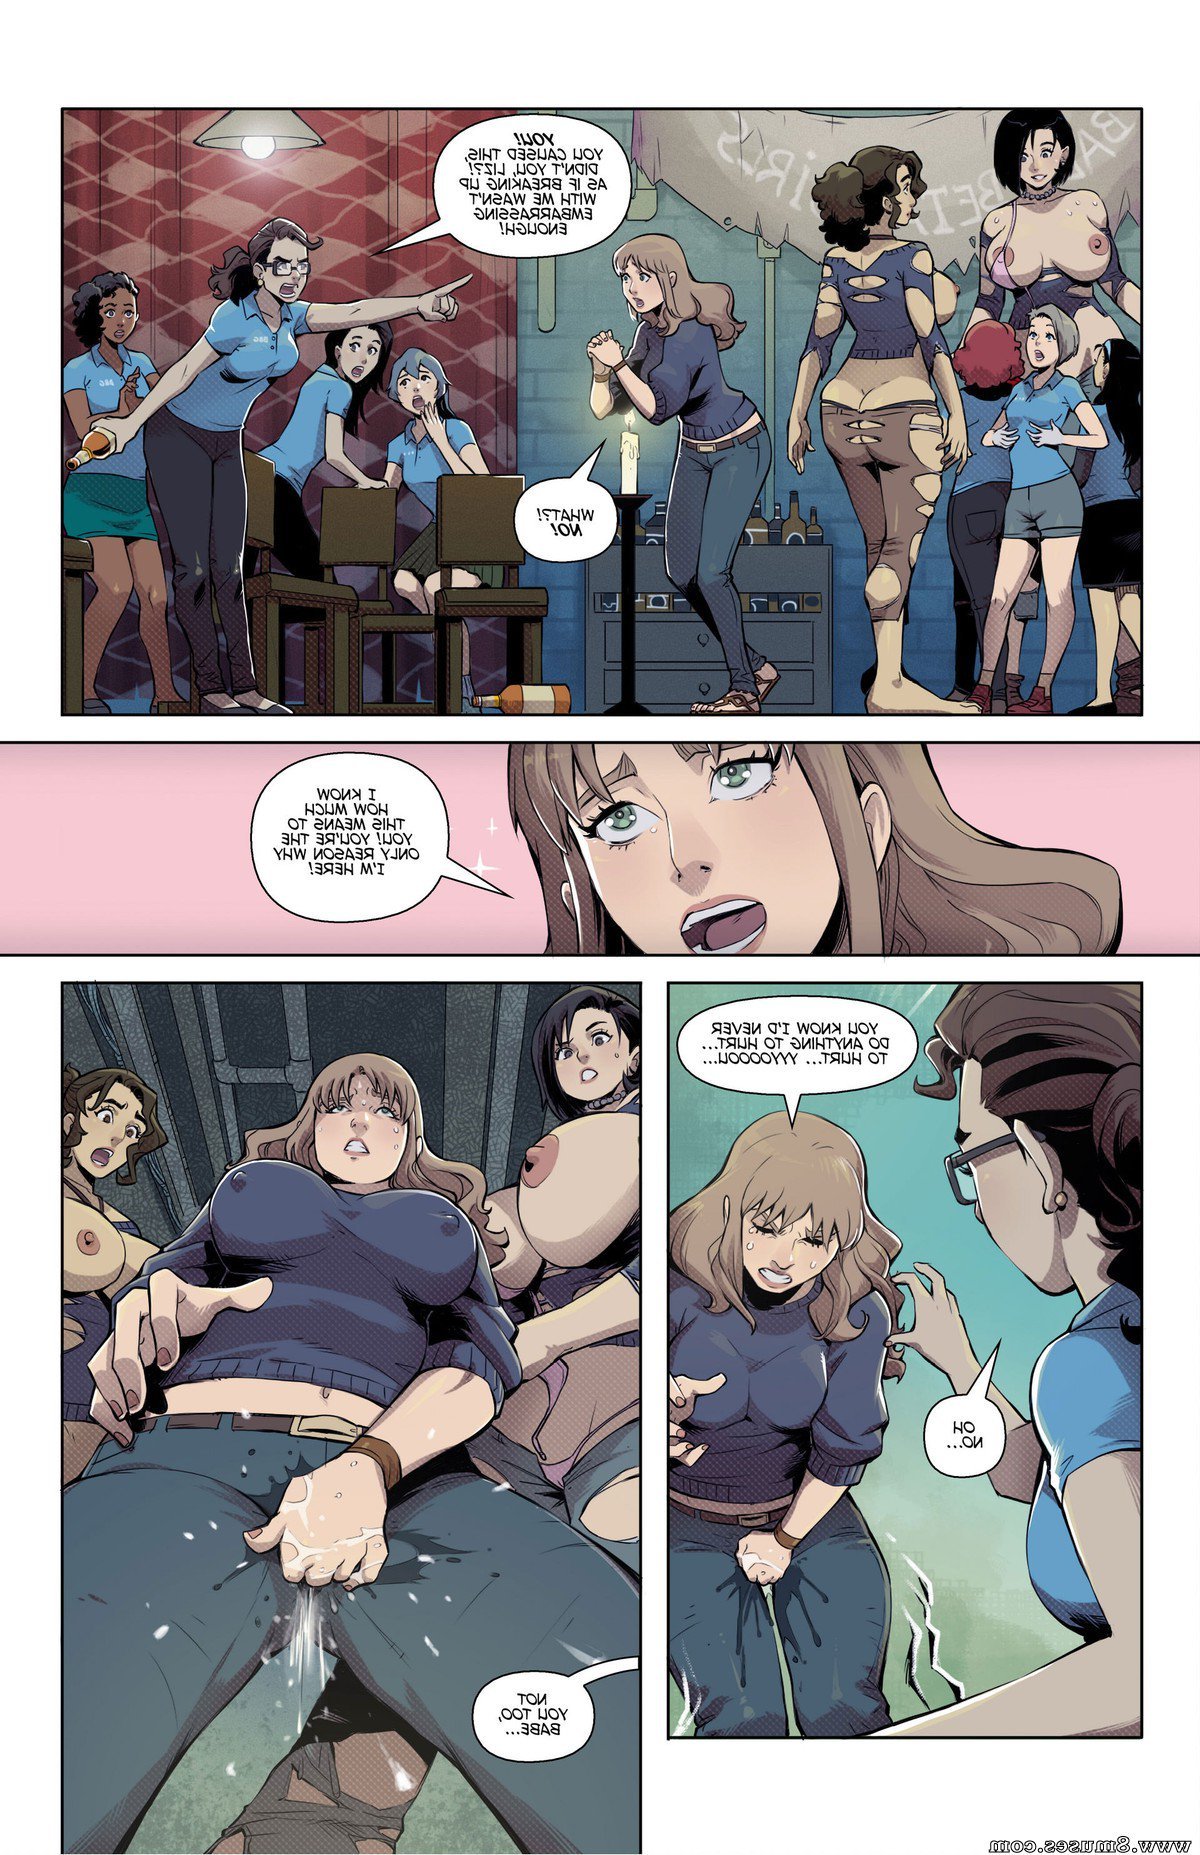 Expansionfan-Comics/Sorority-Problems/Issue-1 Sorority_Problems_-_Issue_1_10.jpg